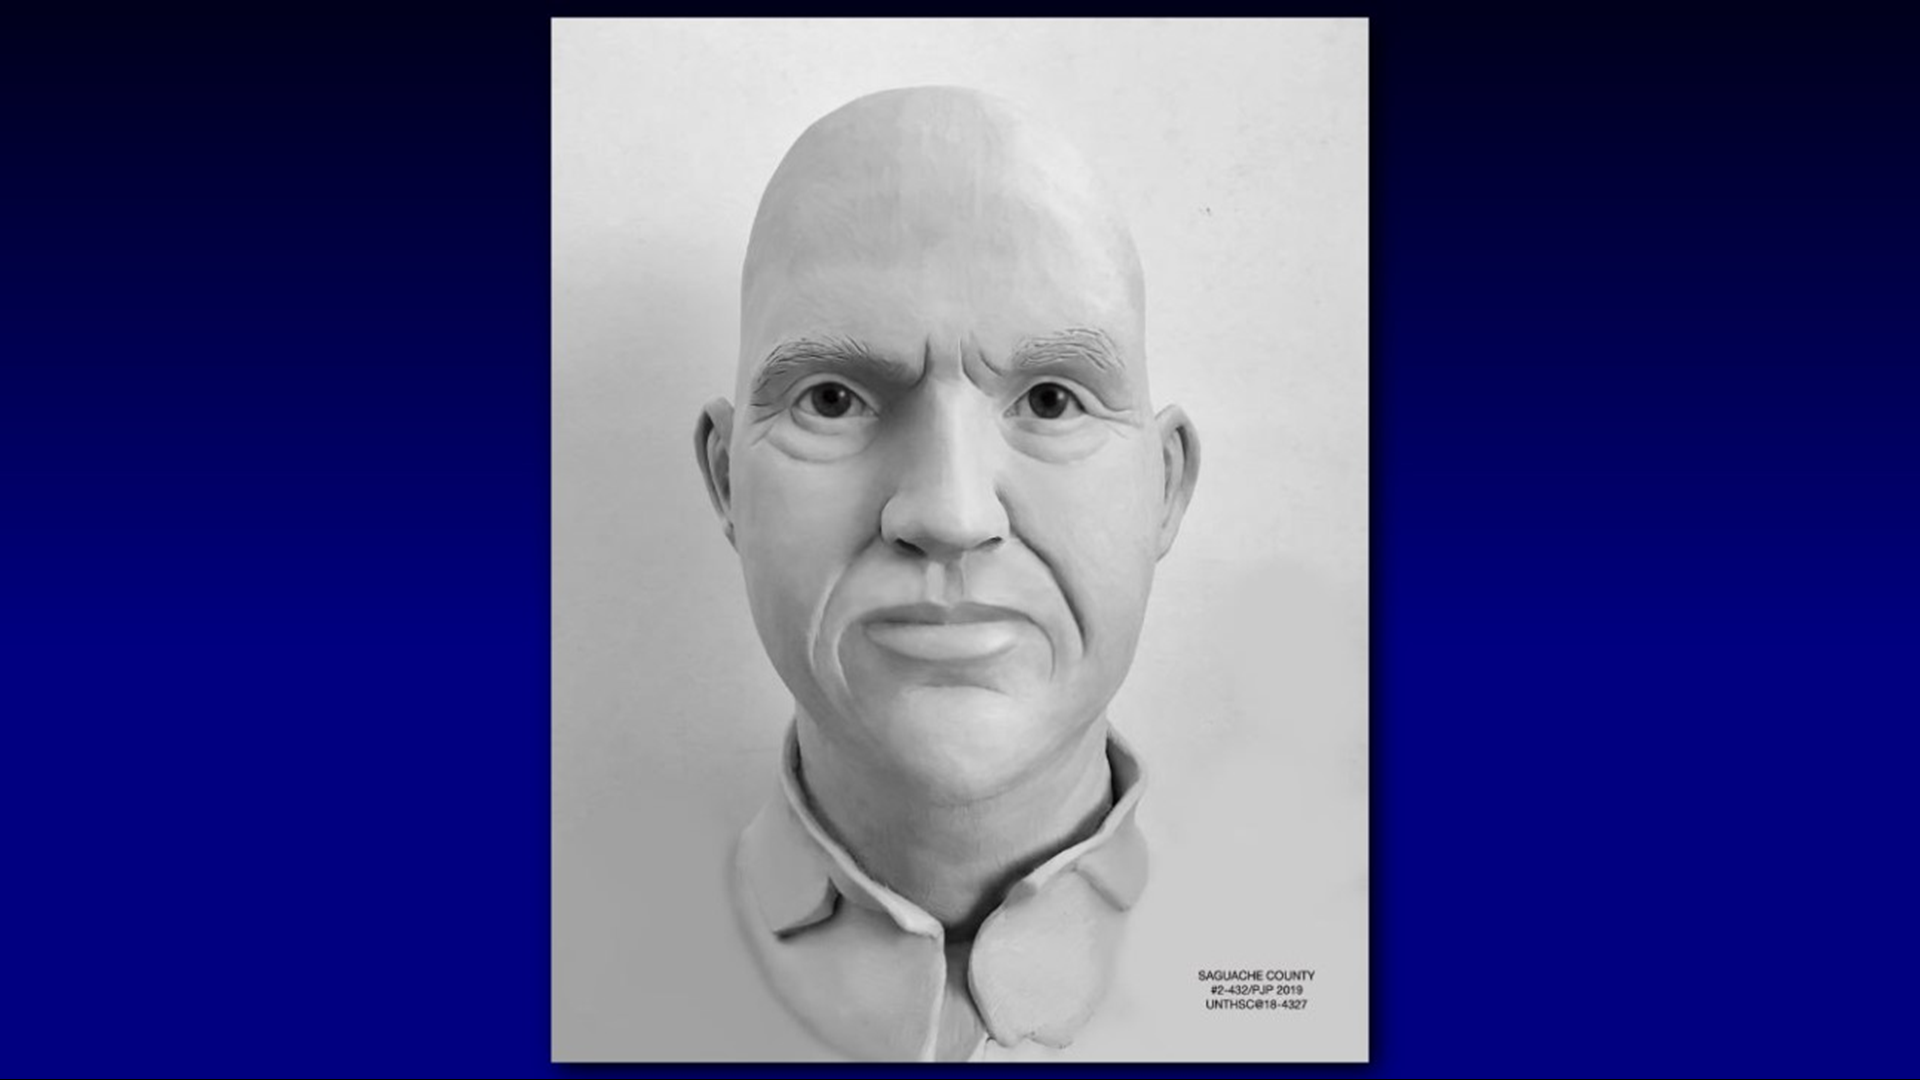 John Doe remains were found in Saguache County in 2002. His death was ruled a homicide, but he has never been identified.